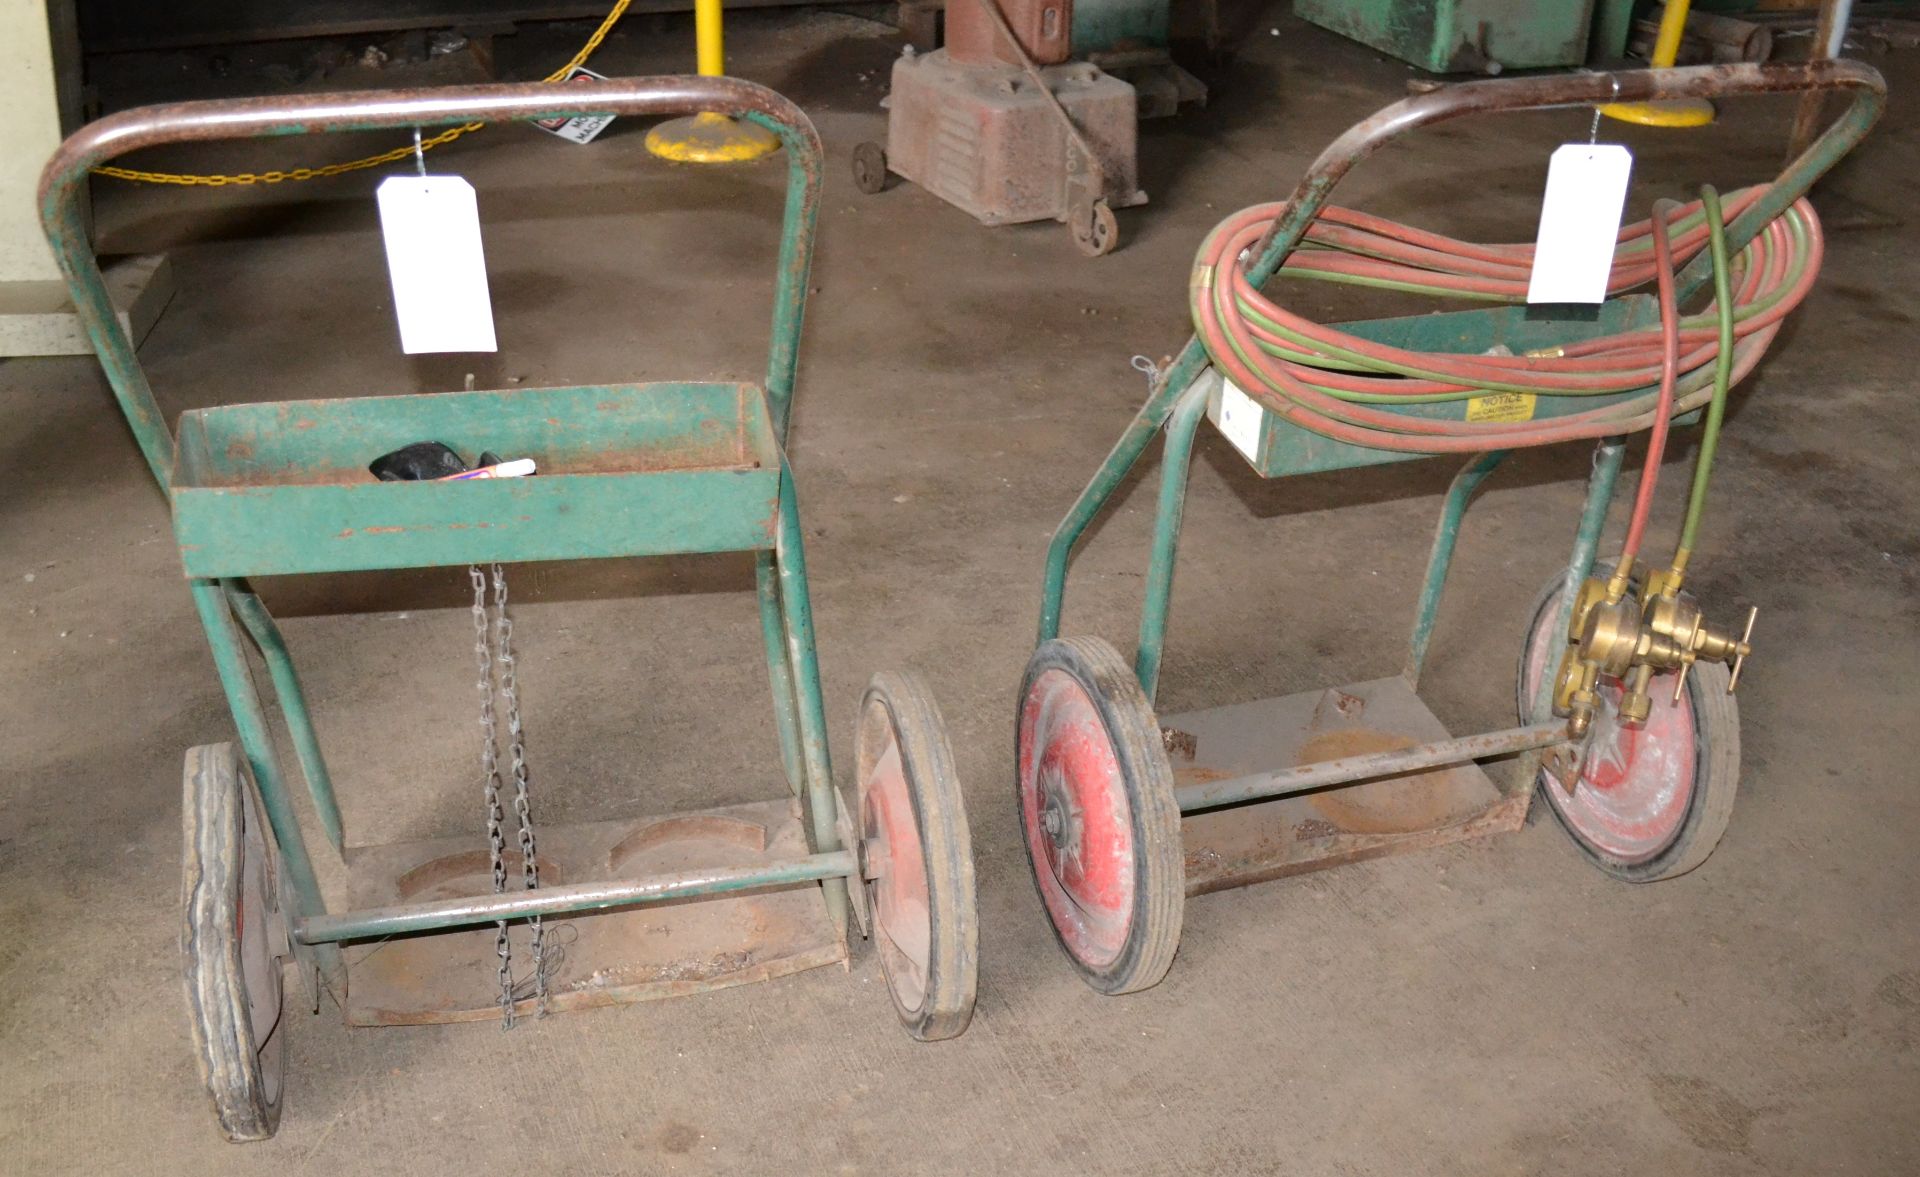 Lot Consisting of (2) Welding Carts With Hoses & Gauges - Image 5 of 5